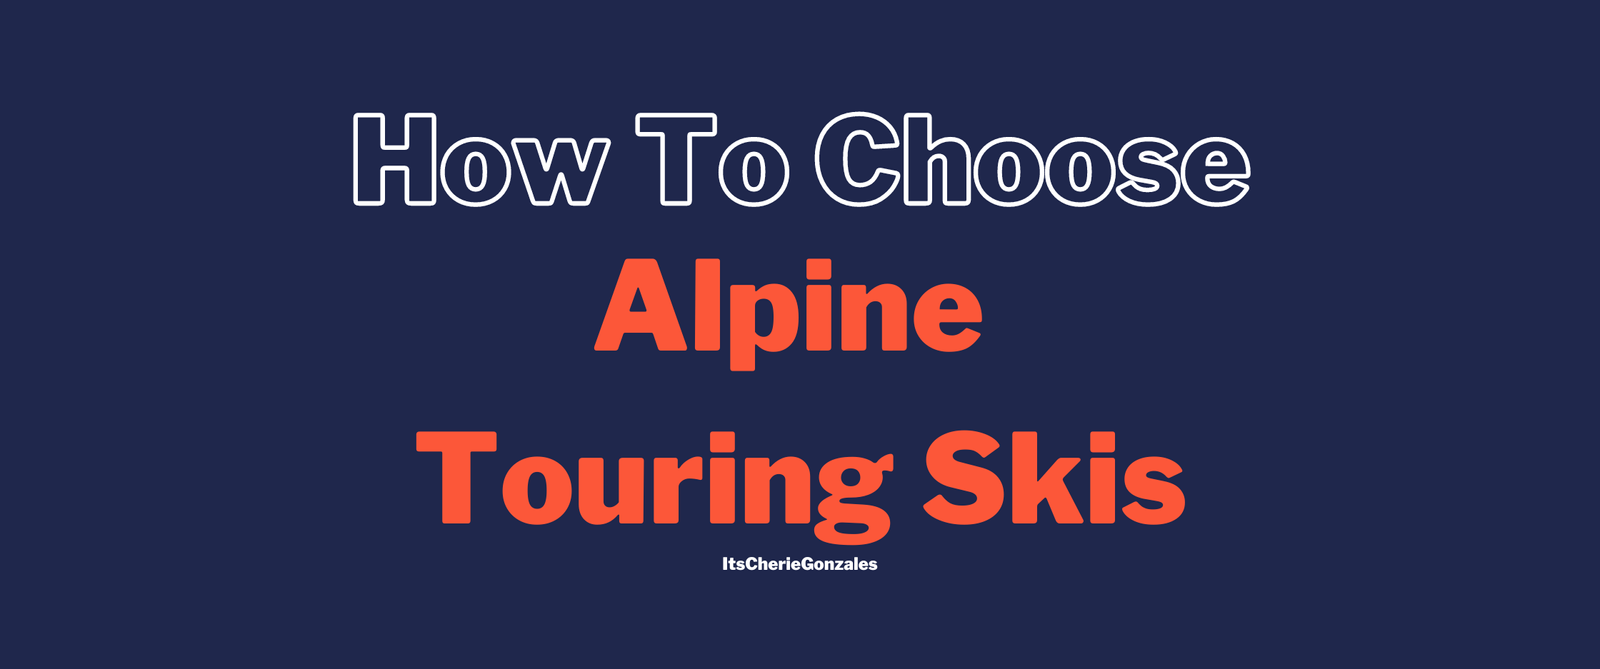 How to choose alpine touring skis banner